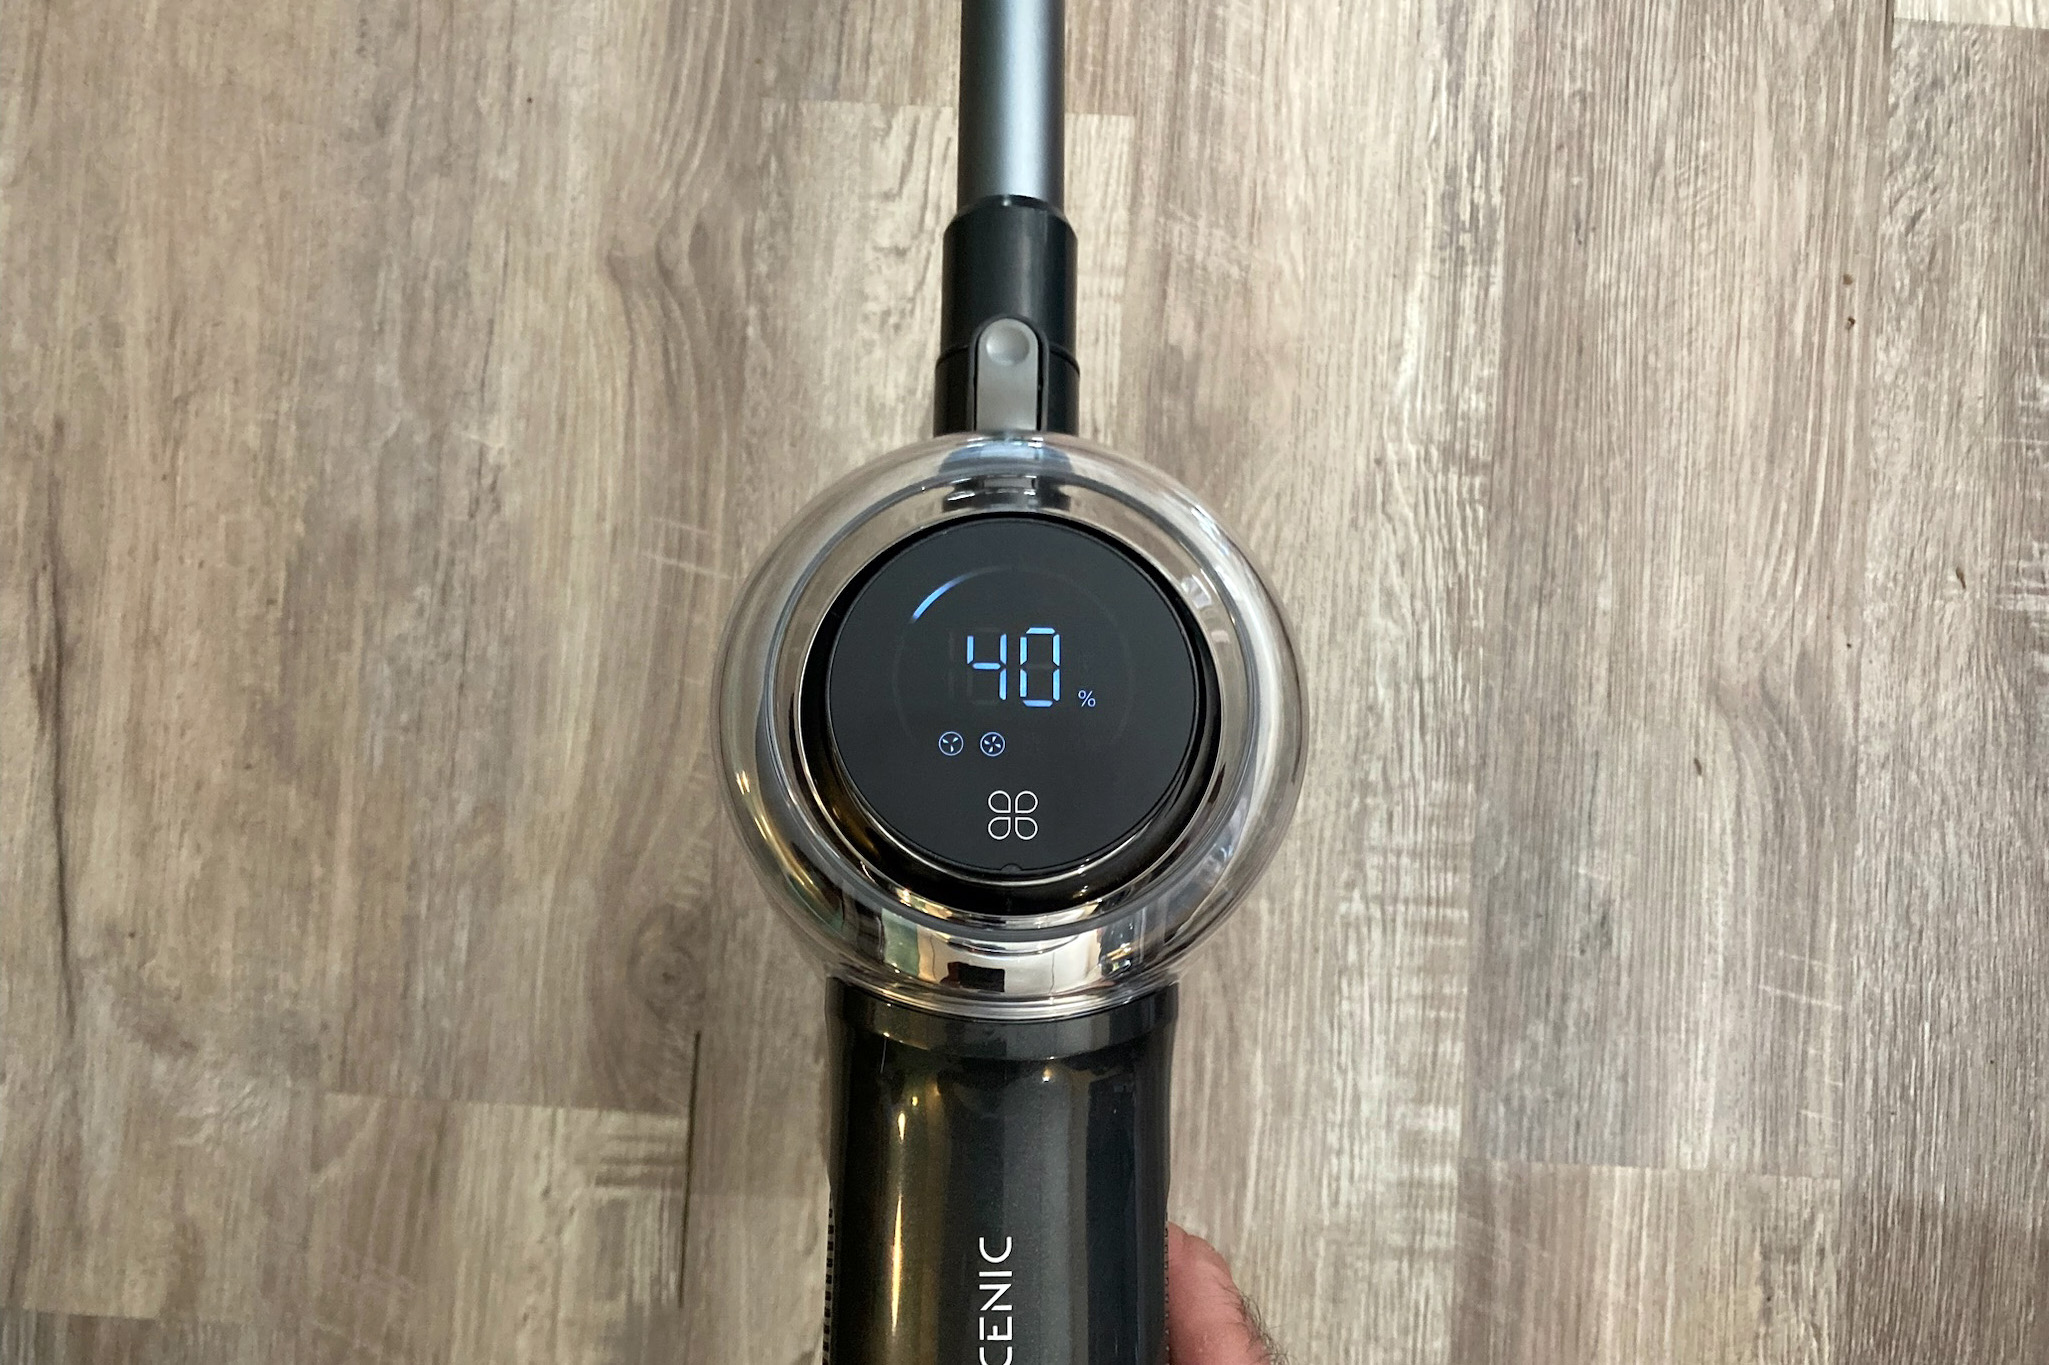 Proscenic P12 review: Dirt can't hide from this cordless vacuum